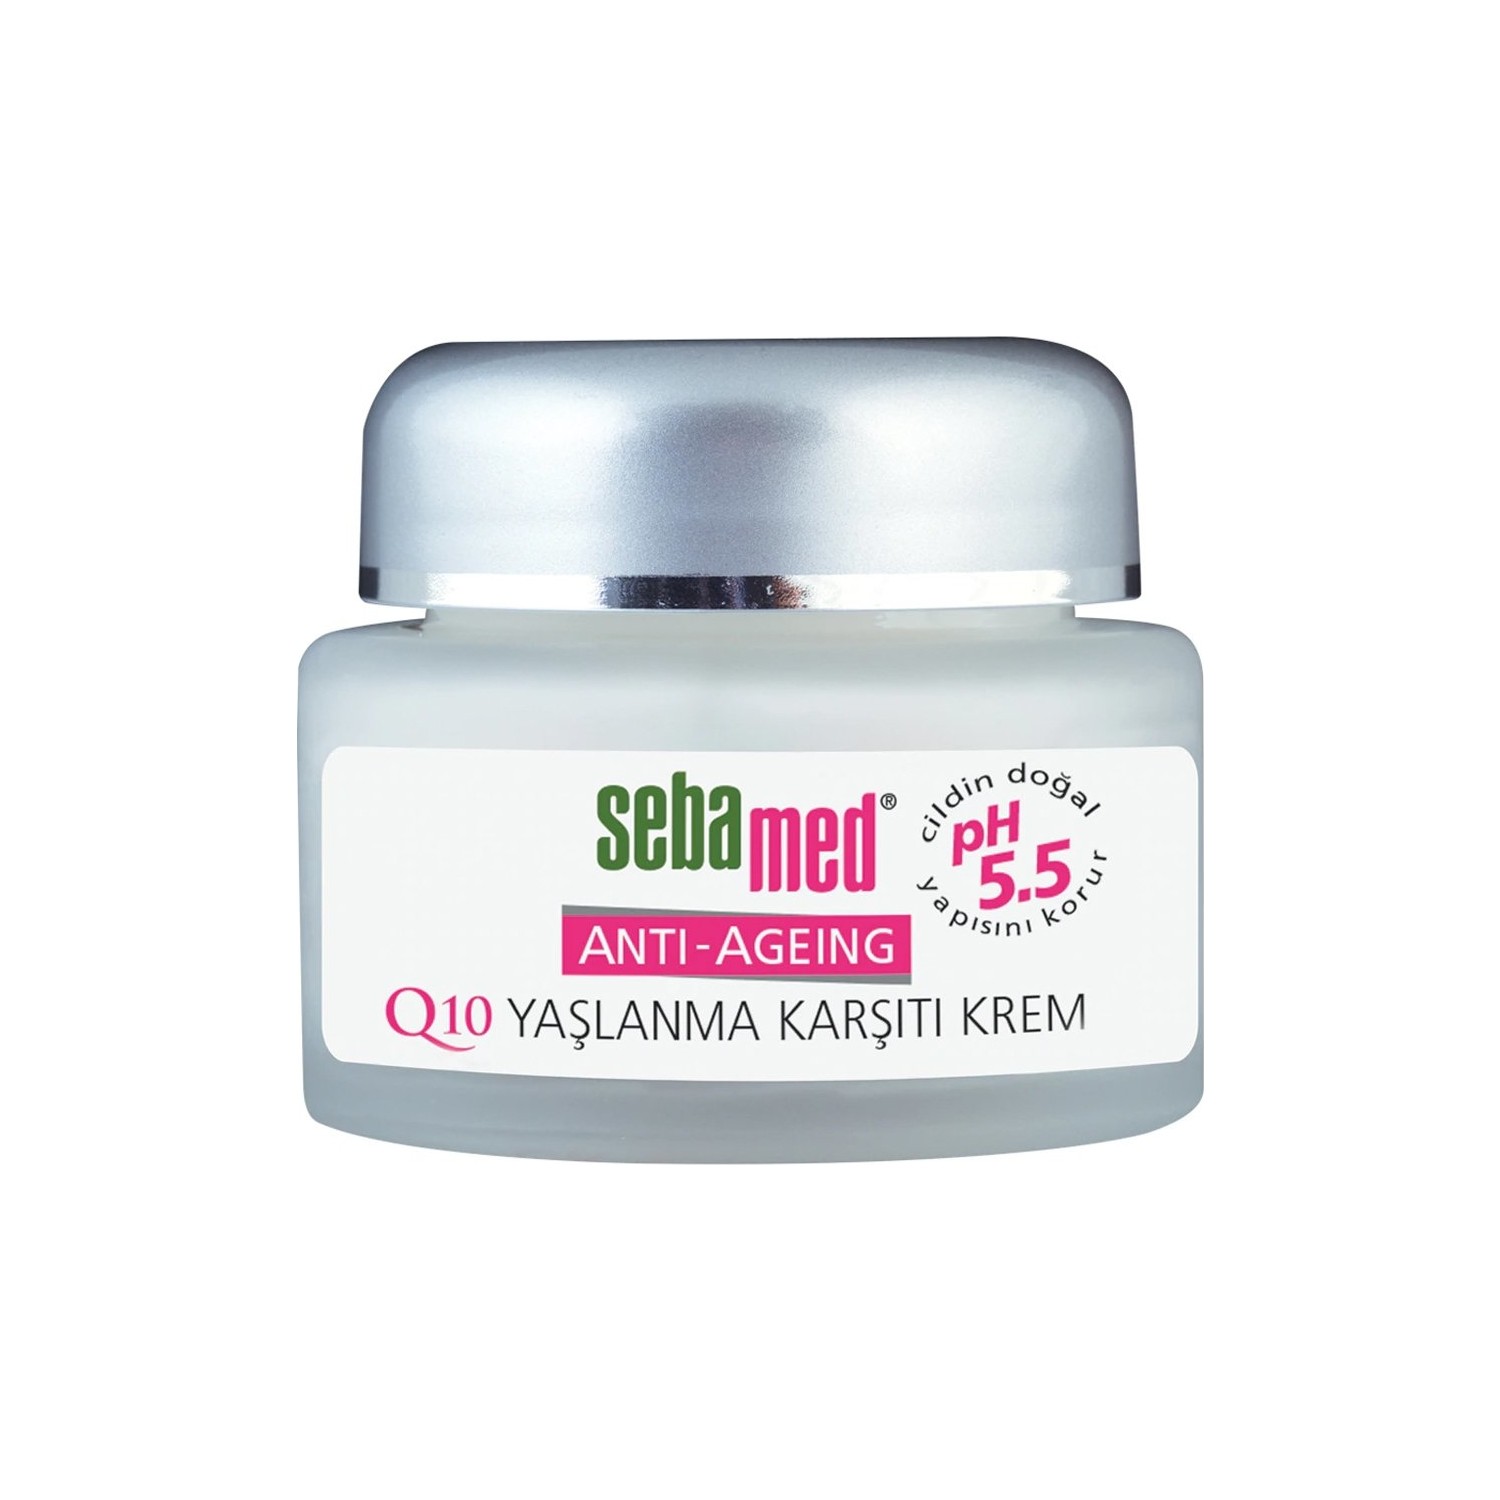 Антивозрастной крем Sebamed Q10, 50 мл антивозрастной крем для лица lookswell anti aging face lifting cream with collagen and hyaluronic acid 30 мл